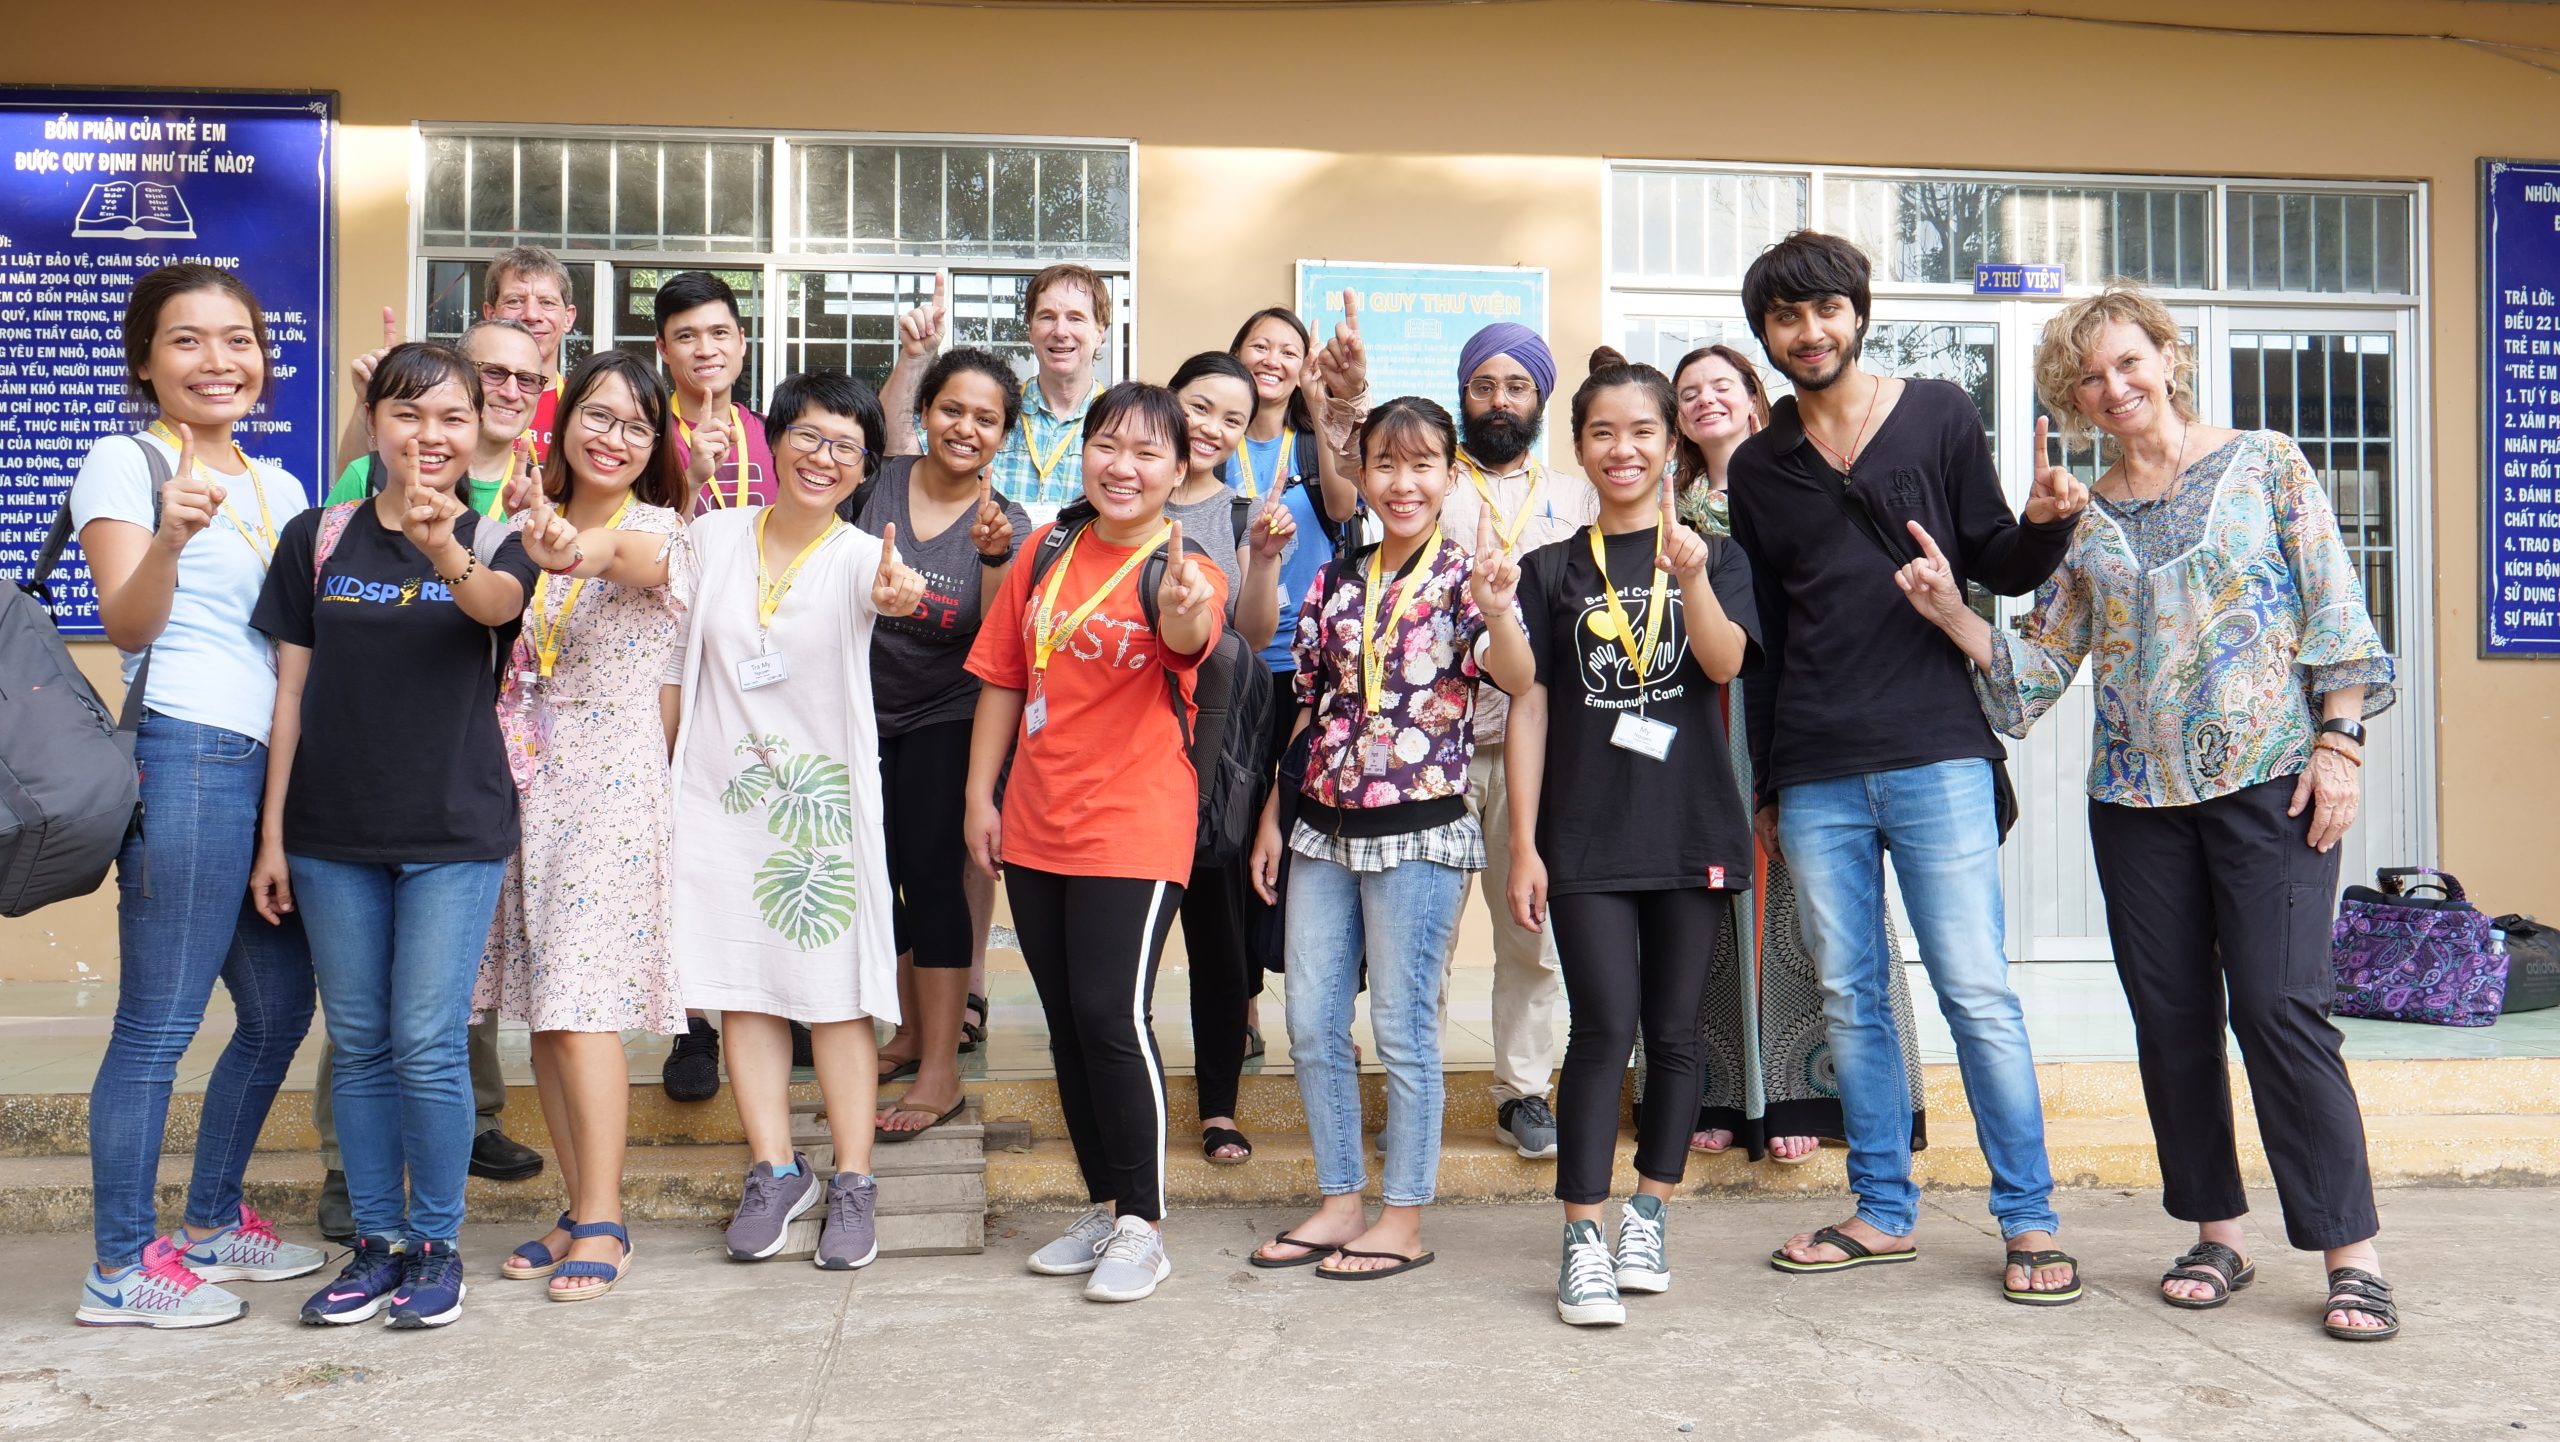 Cadence volunteers and Kidspire Vietnam students pose as a group celebrating STEAM innovation